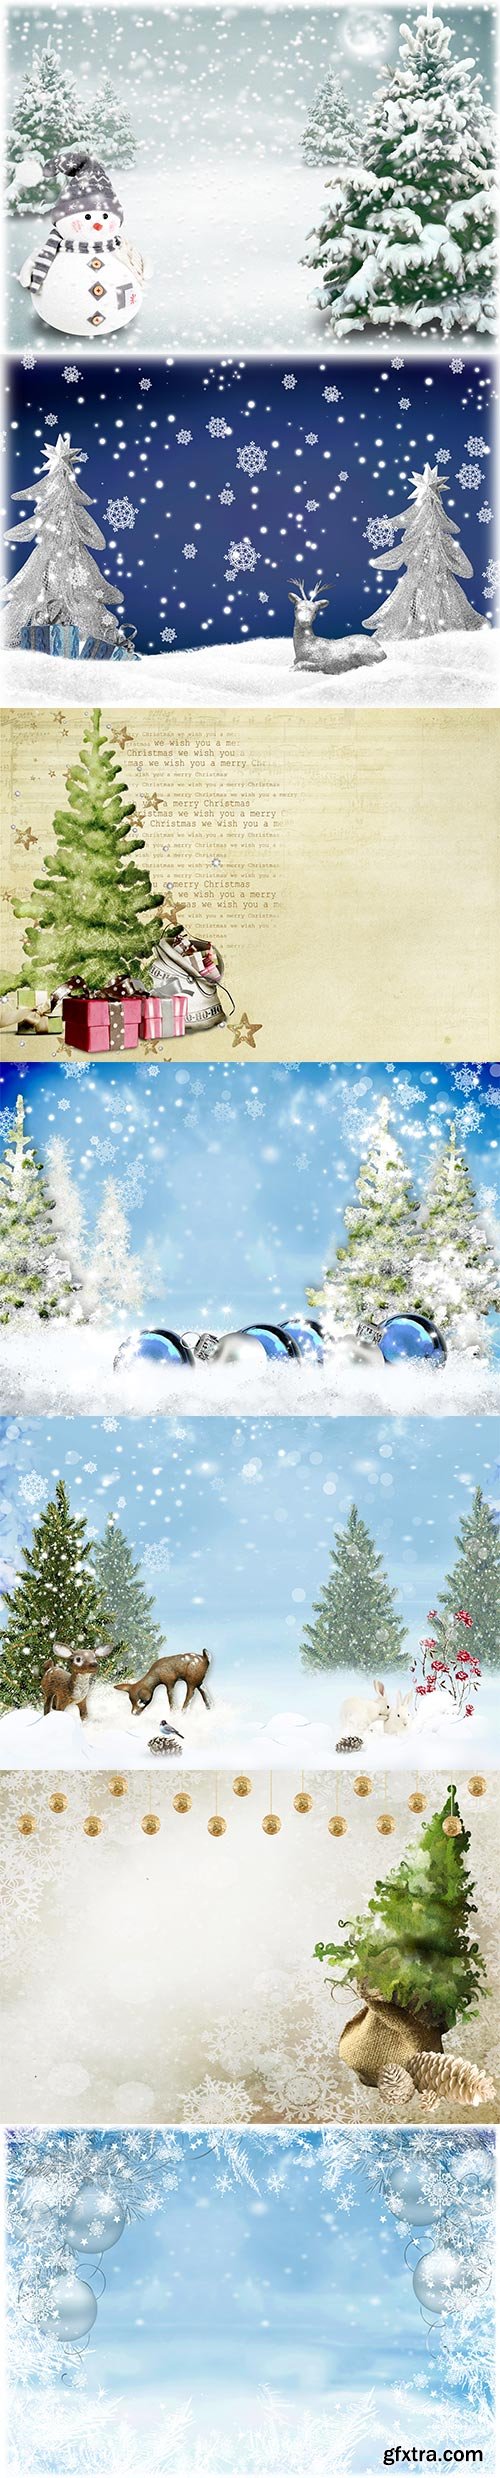 Christmas winter backgrounds - 7